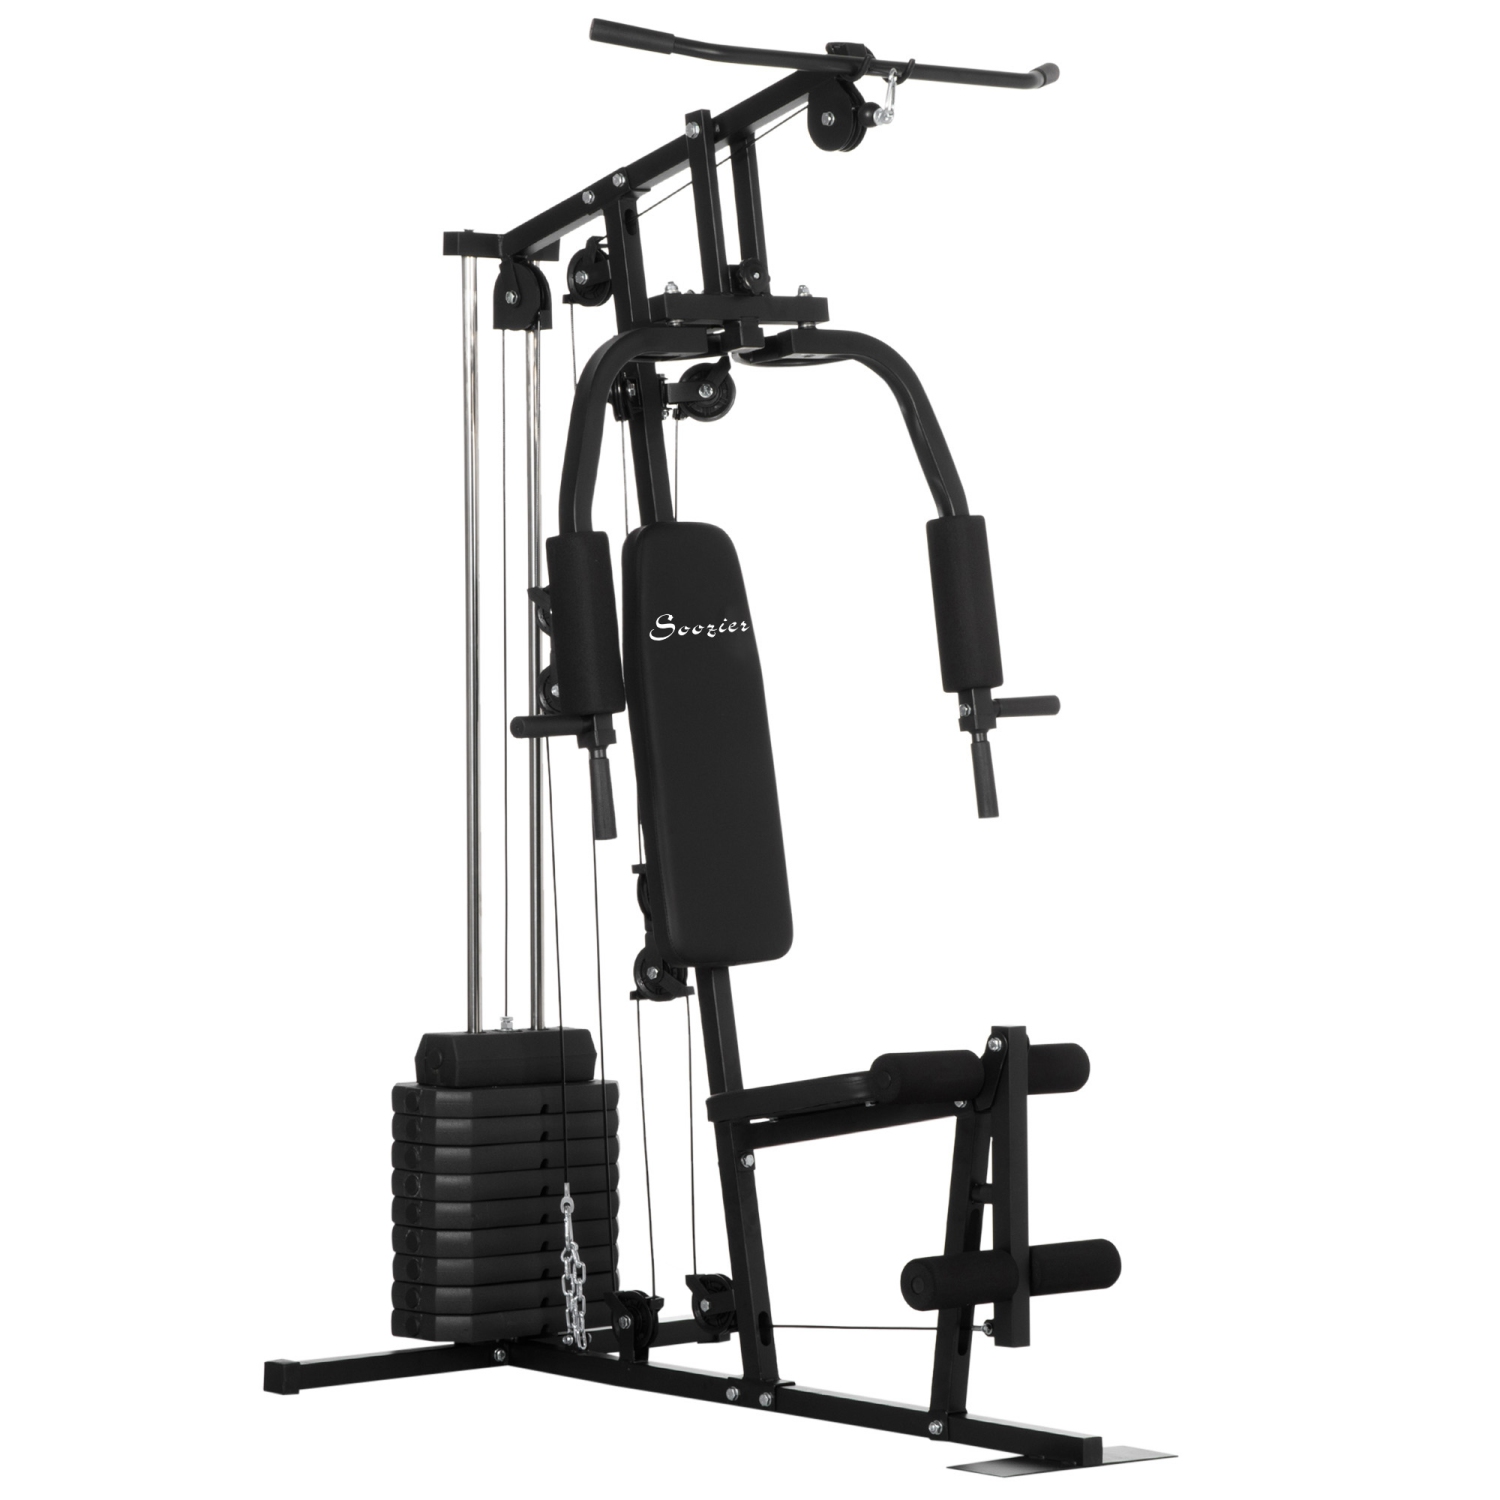 Soozier Home Gym Machine, Multifunction Gym Equipment with 99lbs Weight Stack for Back, Chest, Arm, Legs, and Full Body Workout